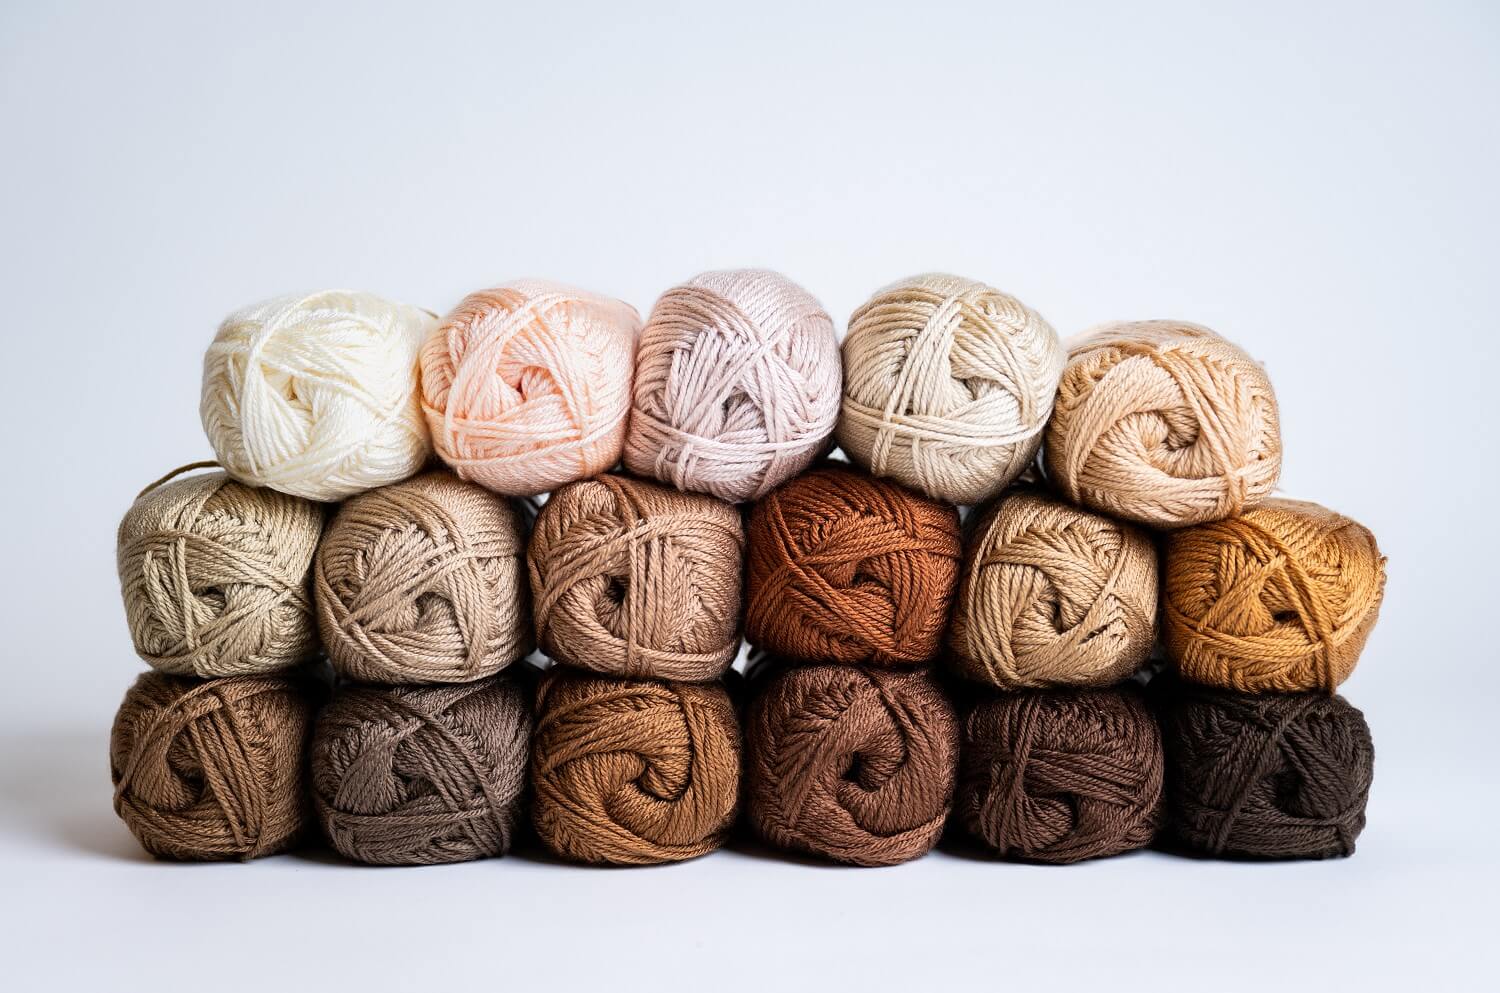 What is a skein? Demystifying names for yarn bundles. - Shiny Happy World